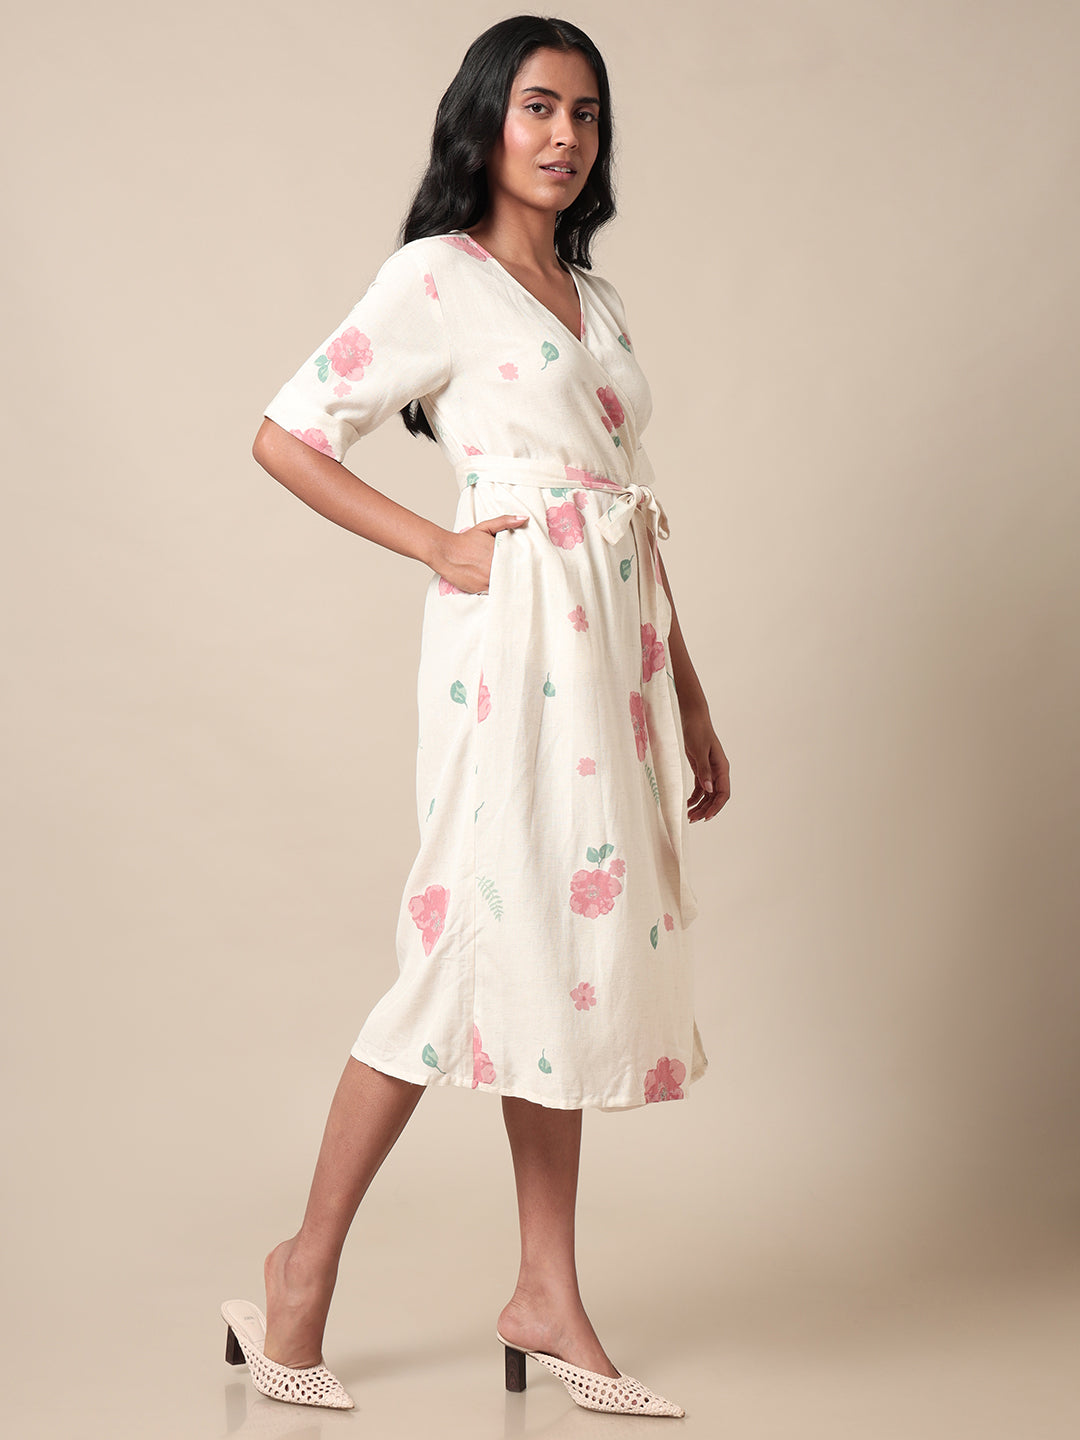 Eclectic Floral Printed Overlap Off White Dress